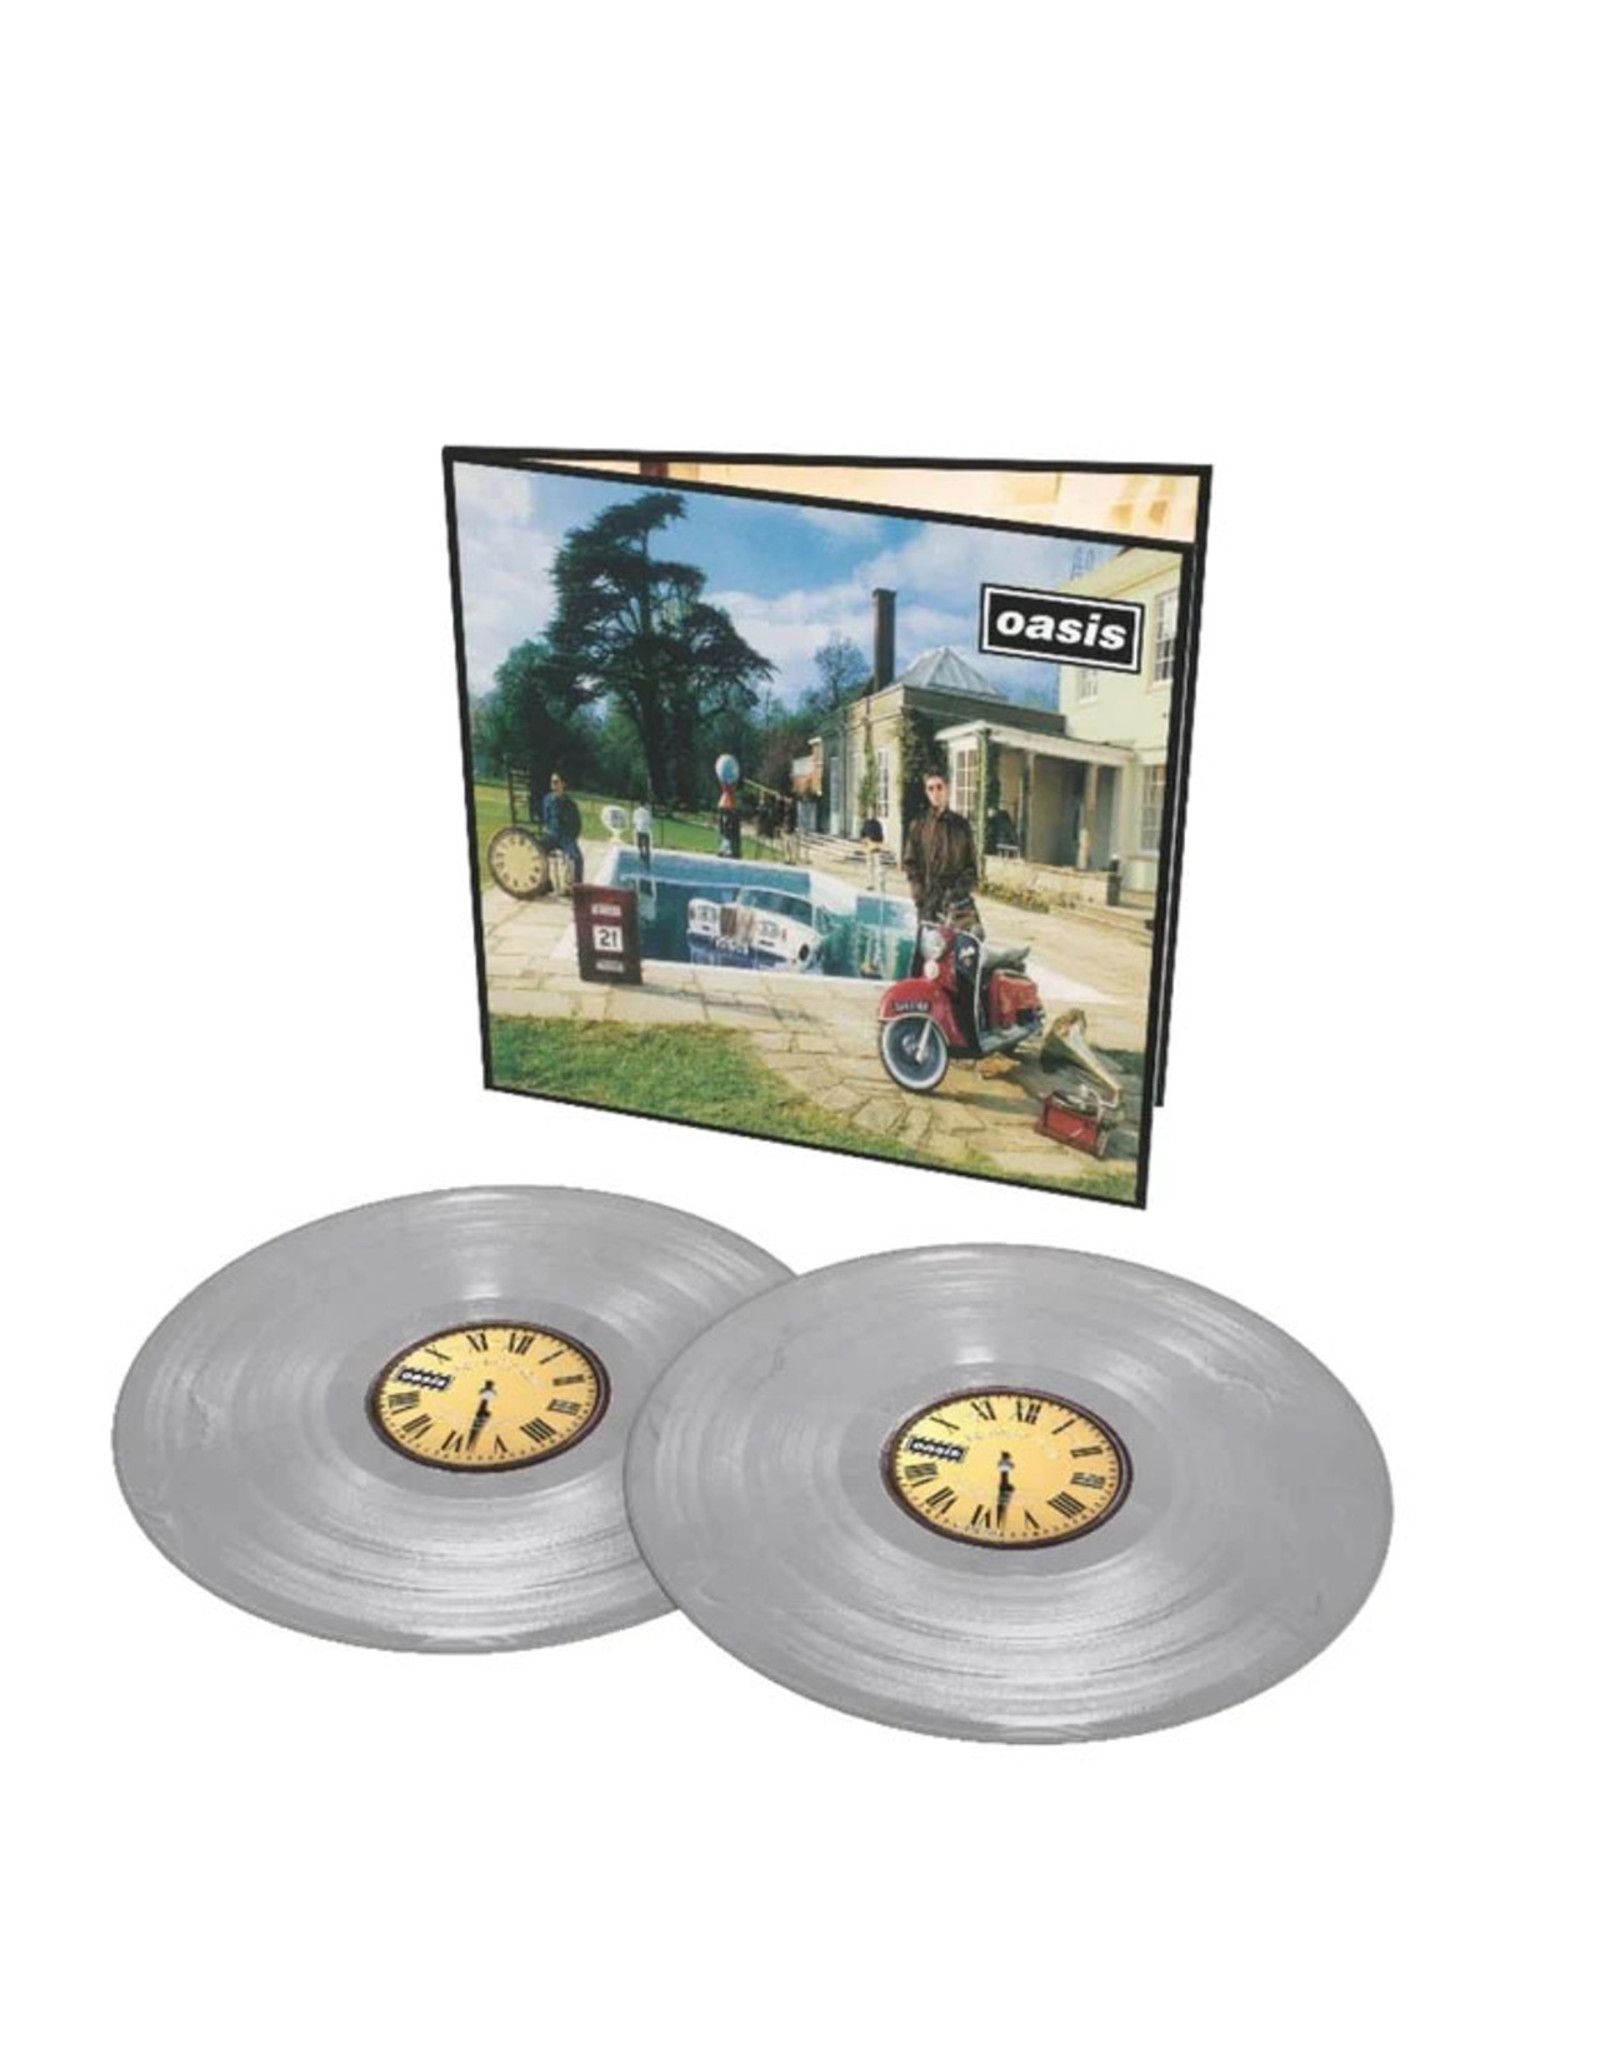 Oasis - Be Here Now (25th Anniversary) [Silver Vinyl]